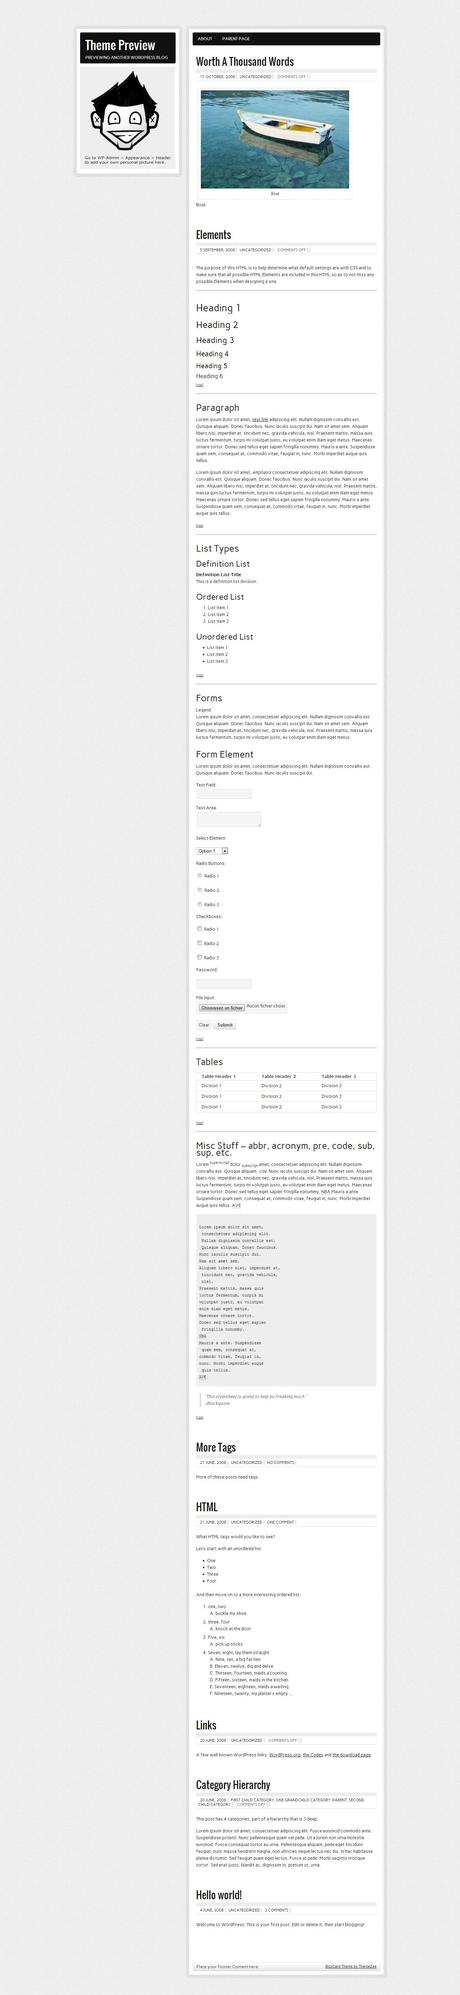 Theme Preview   Previewing Another WordPress Blog3